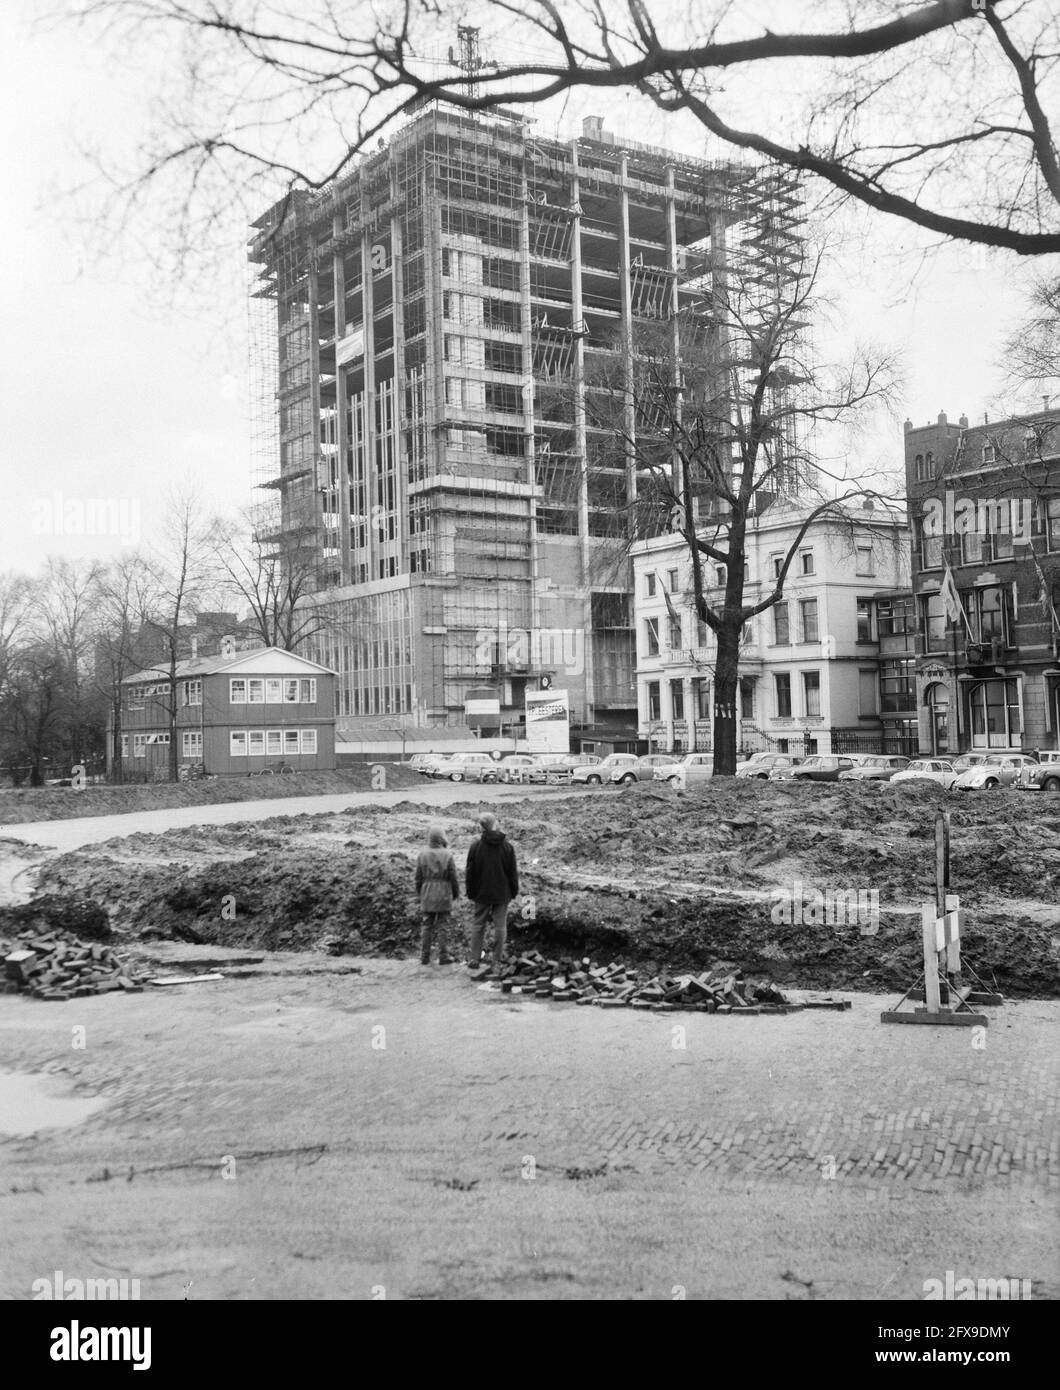 Construction of new headquarters of Phs. van Ommeren at Westerlaan, the 15-story building, January 31, 1961, construction, buildings, headquarters, floors, The Netherlands, 20th century press agency photo, news to remember, documentary, historic photography 1945-1990, visual stories, human history of the Twentieth Century, capturing moments in time Stock Photo